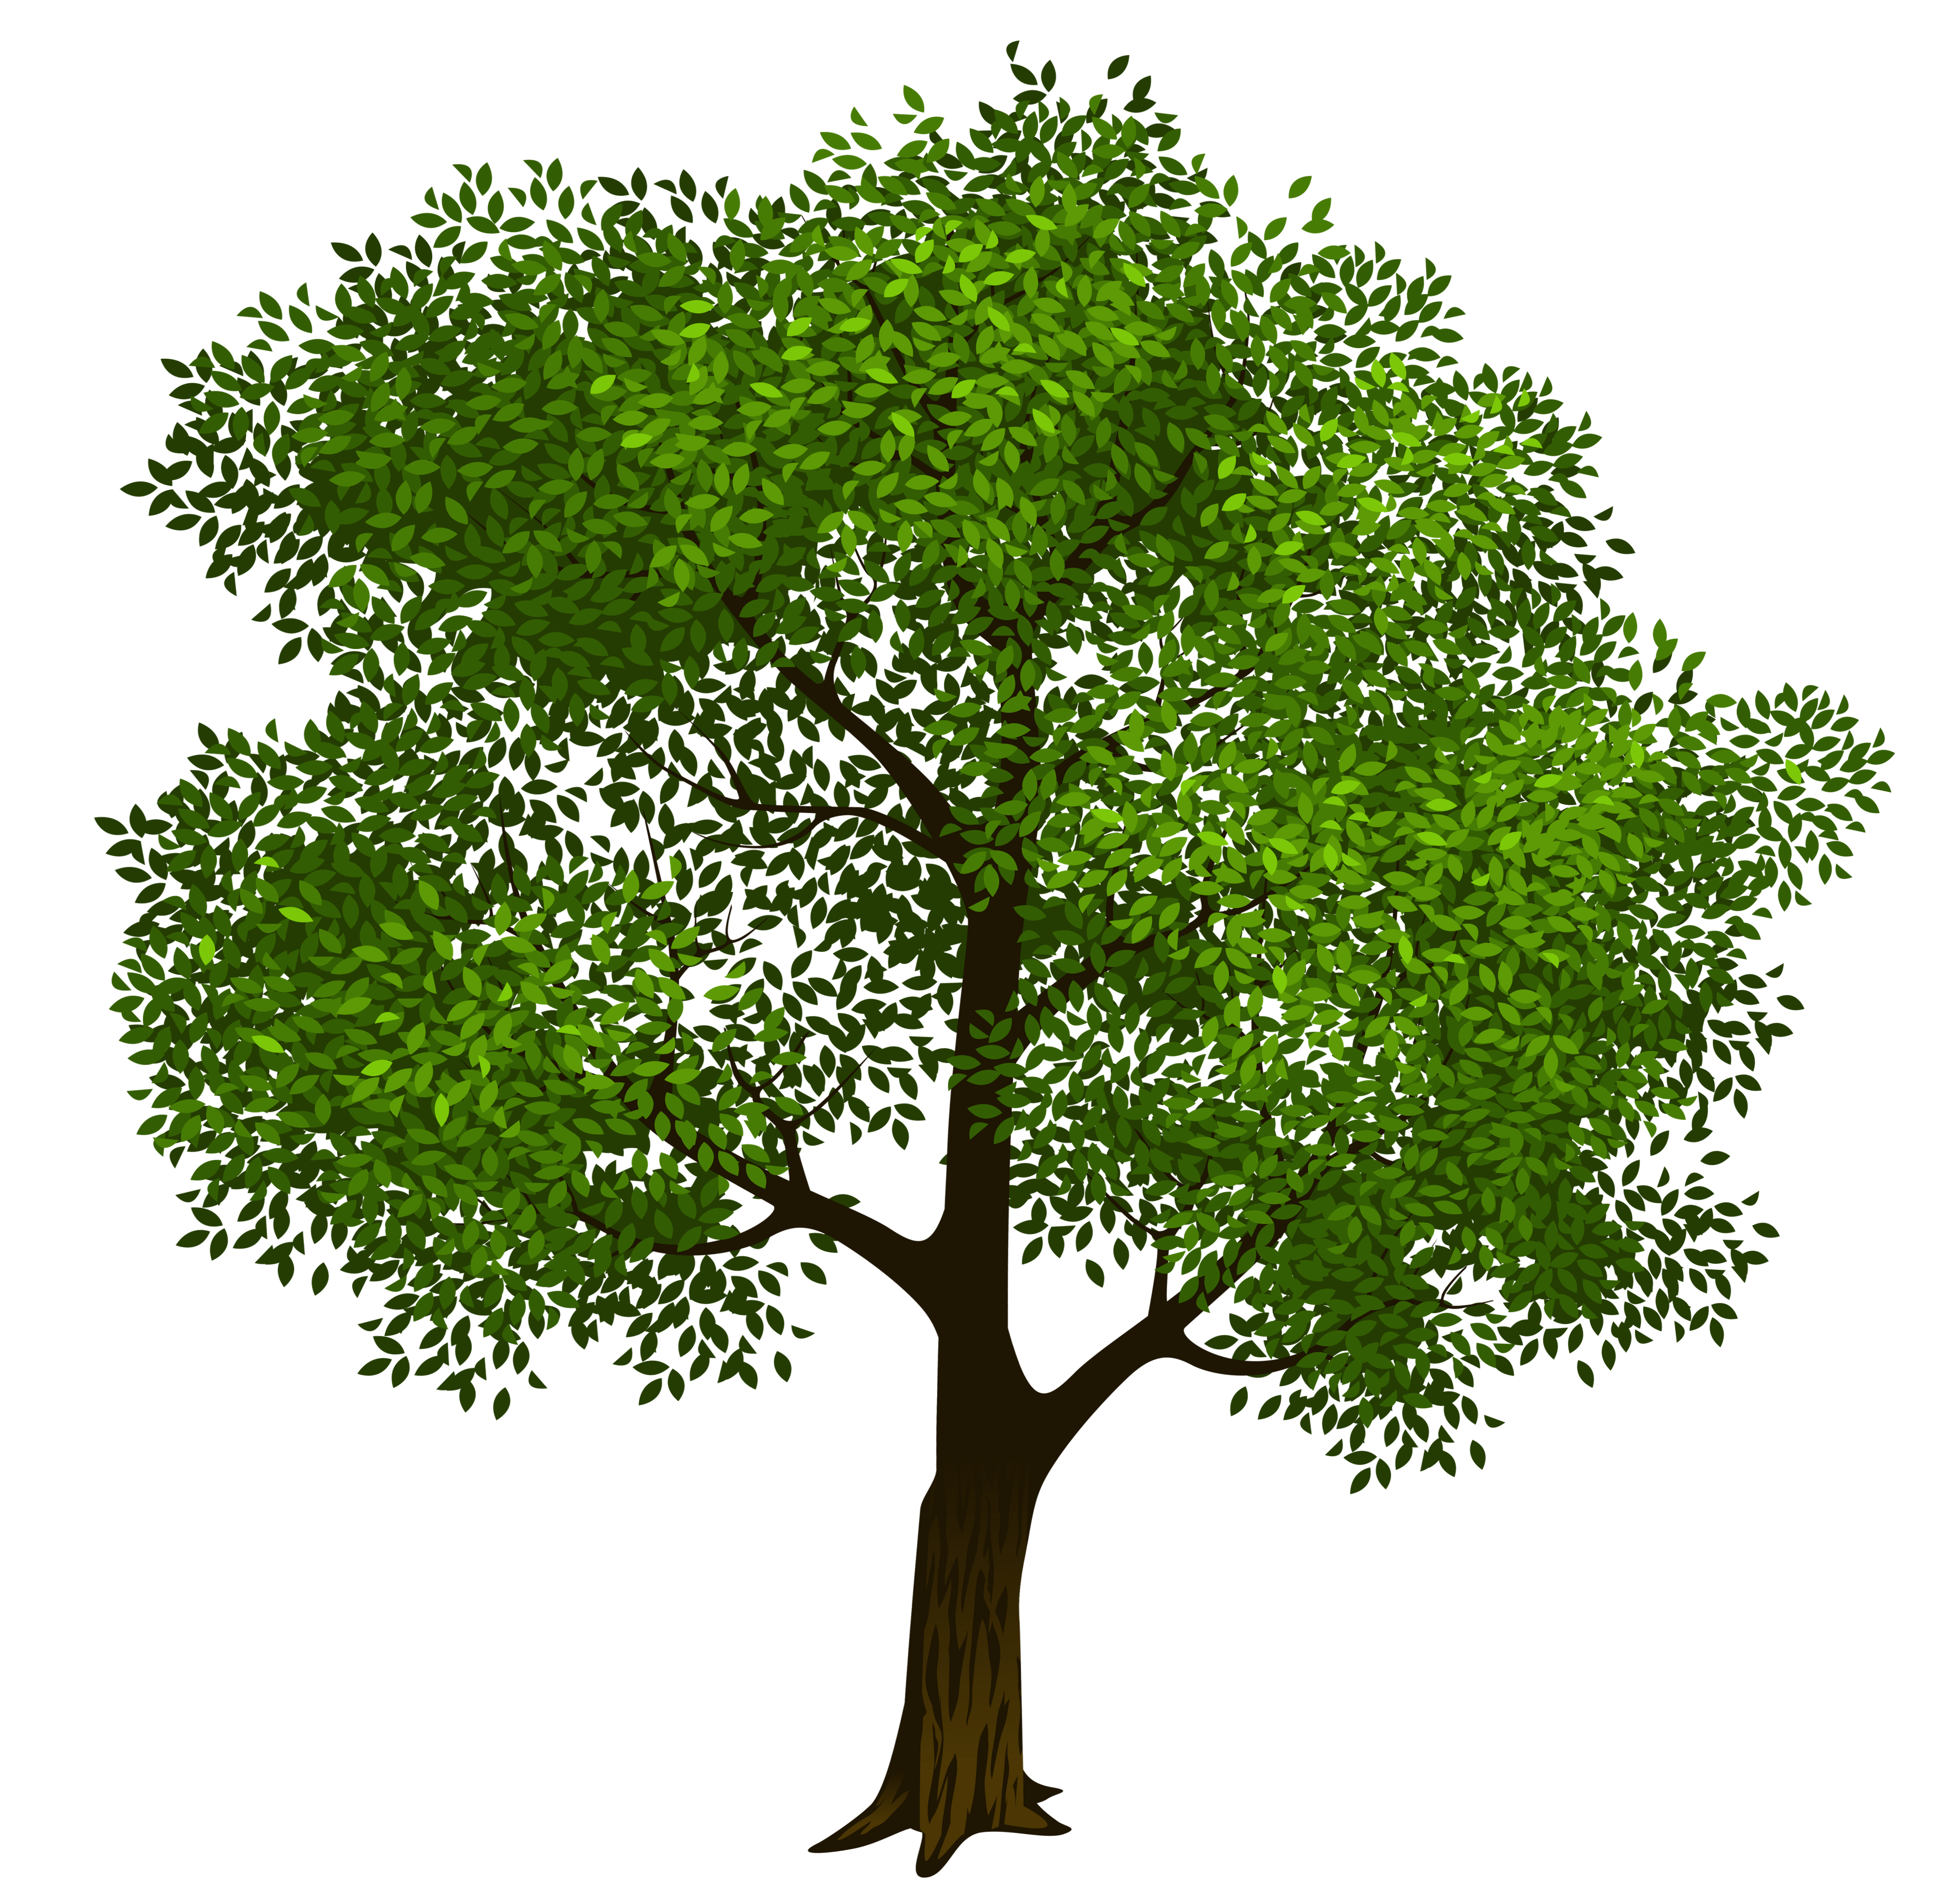 Transparent_Green_Tree_Clipart_Picture.png?m=1423128566 